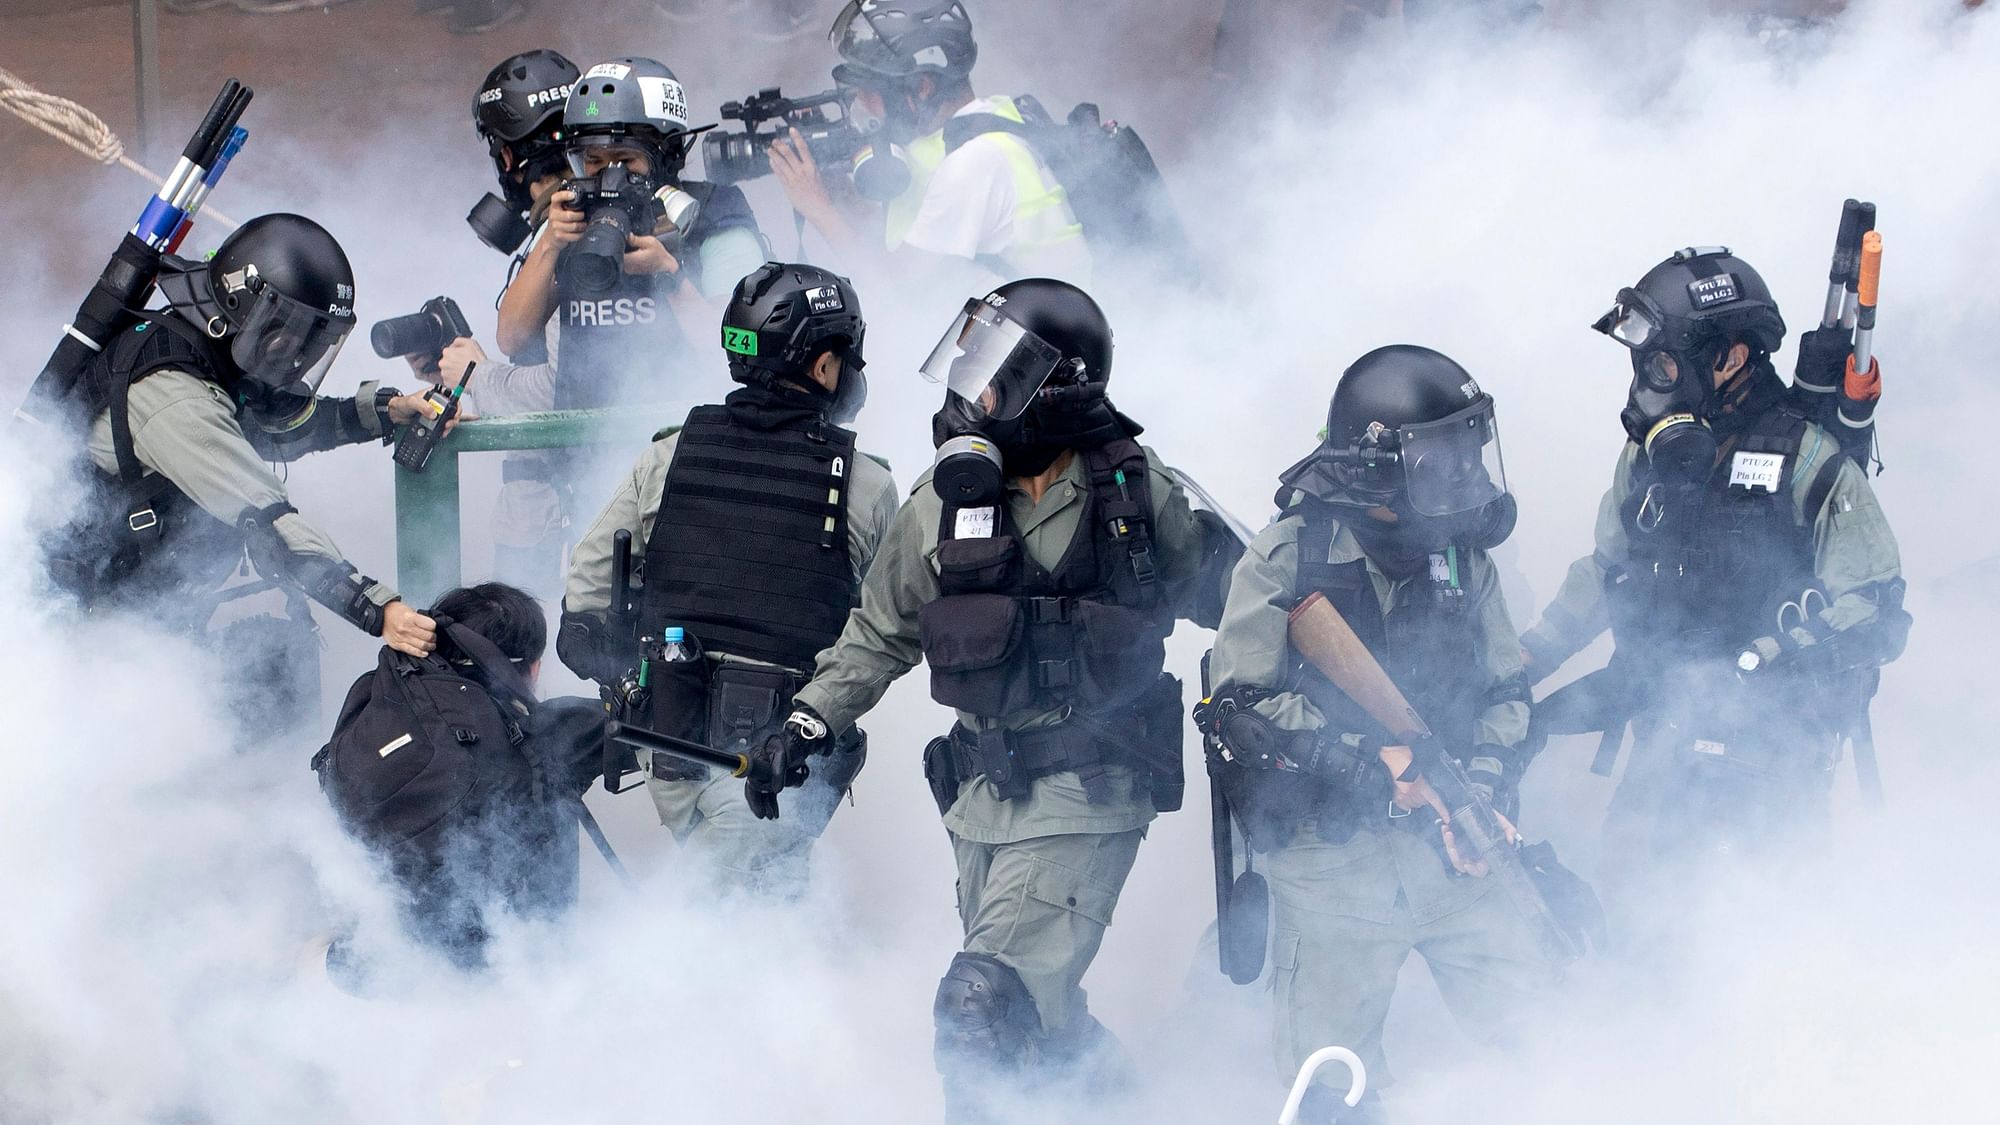 Police in riot gear move through a cloud of smoke as they detain a protester at the Hong Kong Polytechnic University in Hong Kong on Monday, 18 November 2019. Image used for representational purposes.